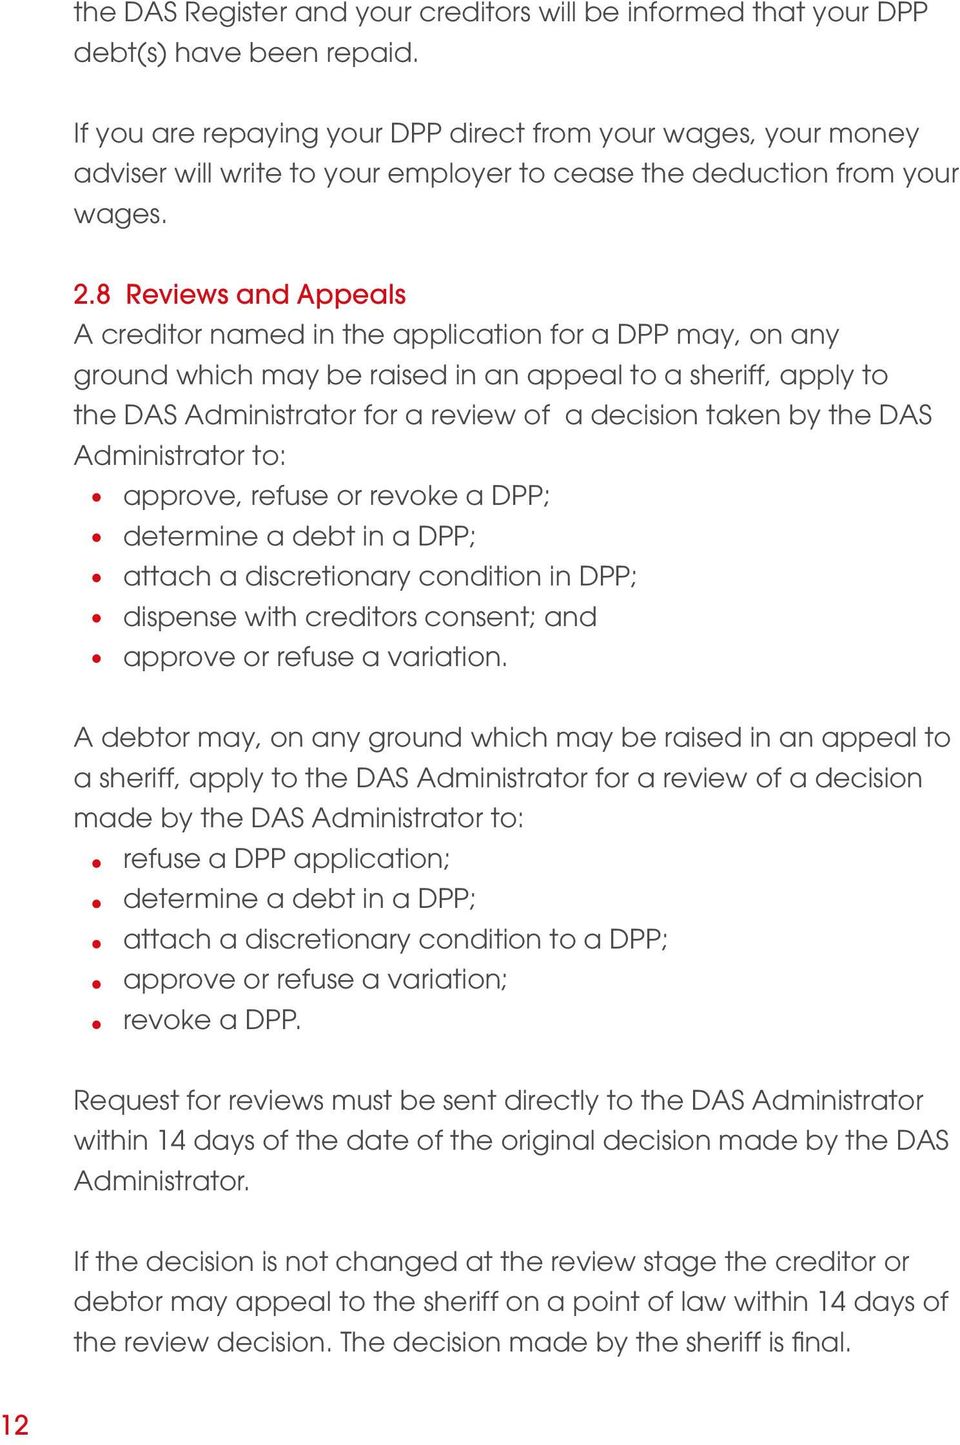 8 Reviews and Appeals A creditor named in the application for a DPP may, on any ground which may be raised in an appeal to a sheriff, apply to the DAS Administrator for a review of a decision taken